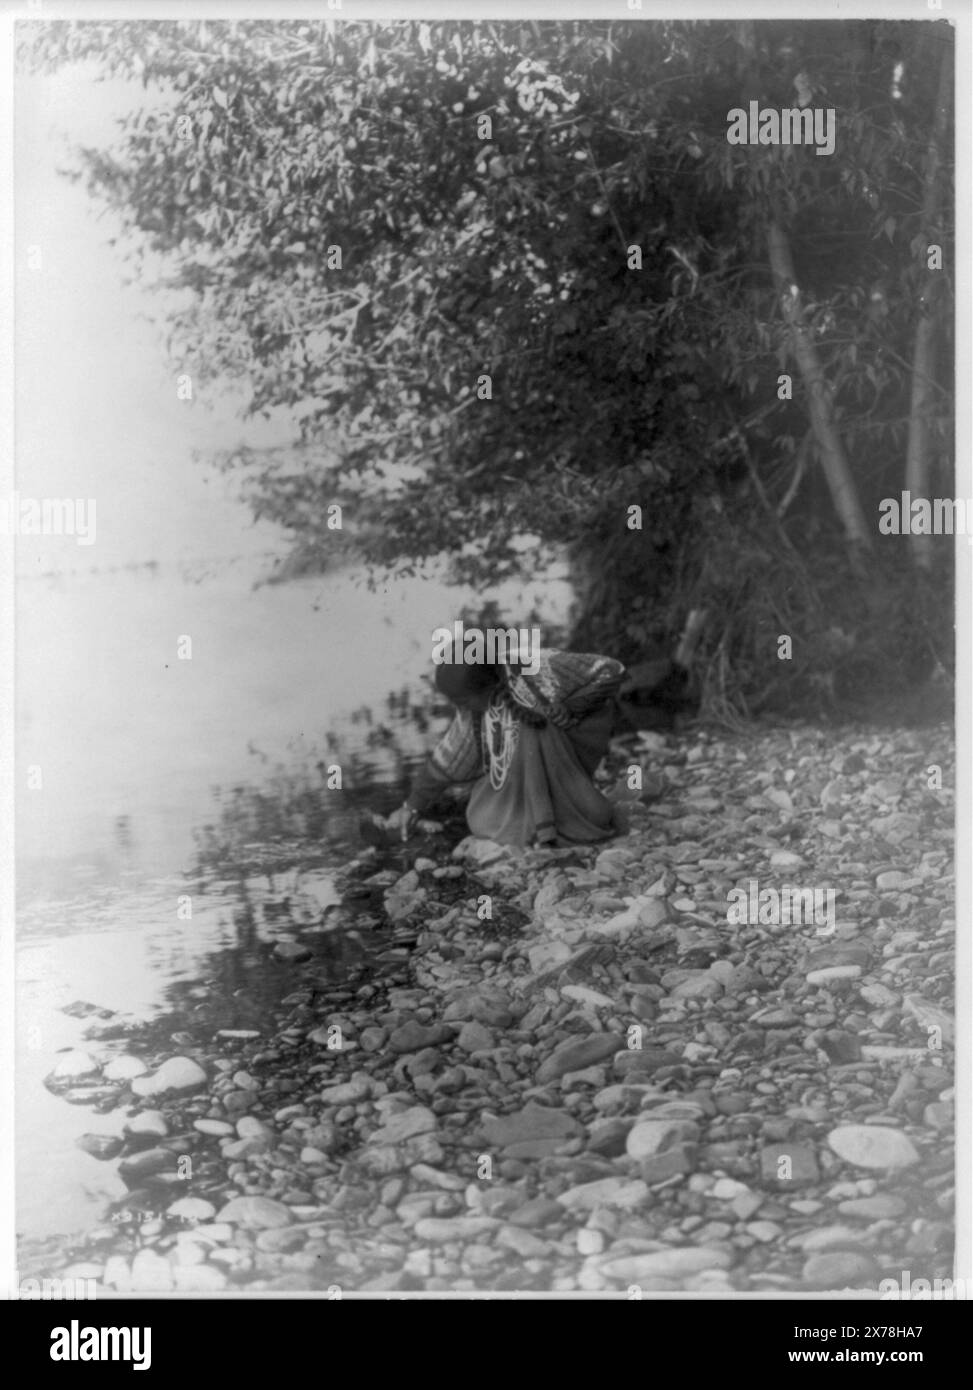 By the river Flathead, Curtis no. 3151-10., Forms part of: Edward S. Curtis Collection ., Published in: The North American Indian / Edward S. Curtis. [Seattle, Wash.] : Edward S. Curtis, 1907-30, Suppl. v. 7, pl. 236.. Indians of North America, Women, 1910. , Salish Indians, Women, 1910. , Drinking vessels, 1910. , Rocks, 1910. Stock Photo